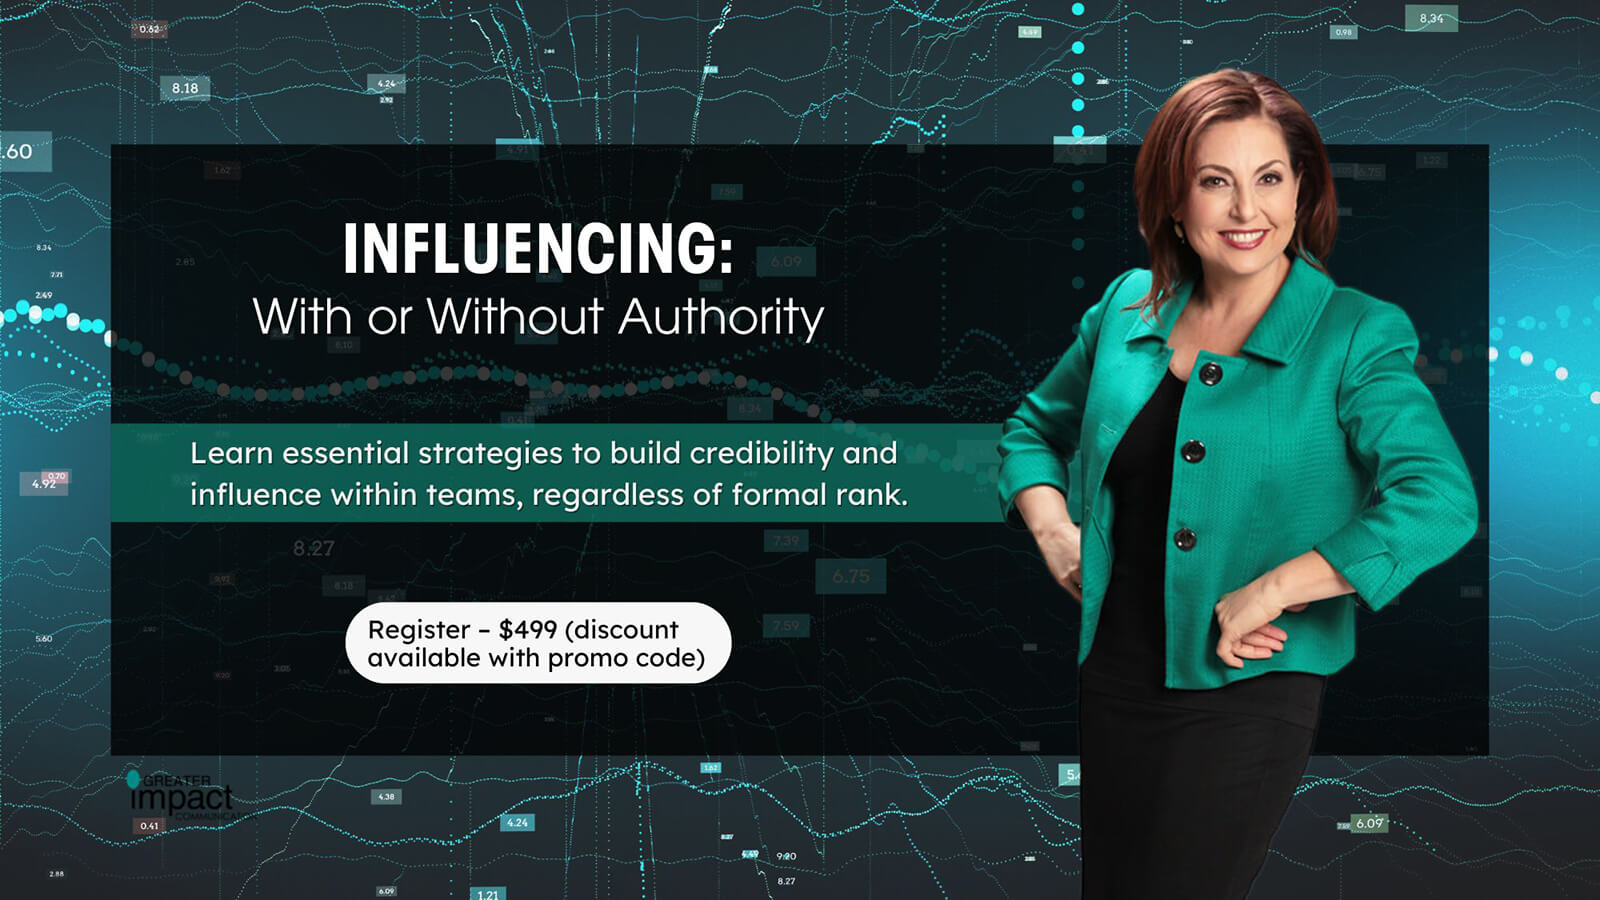 Influencing: With or Without Authority